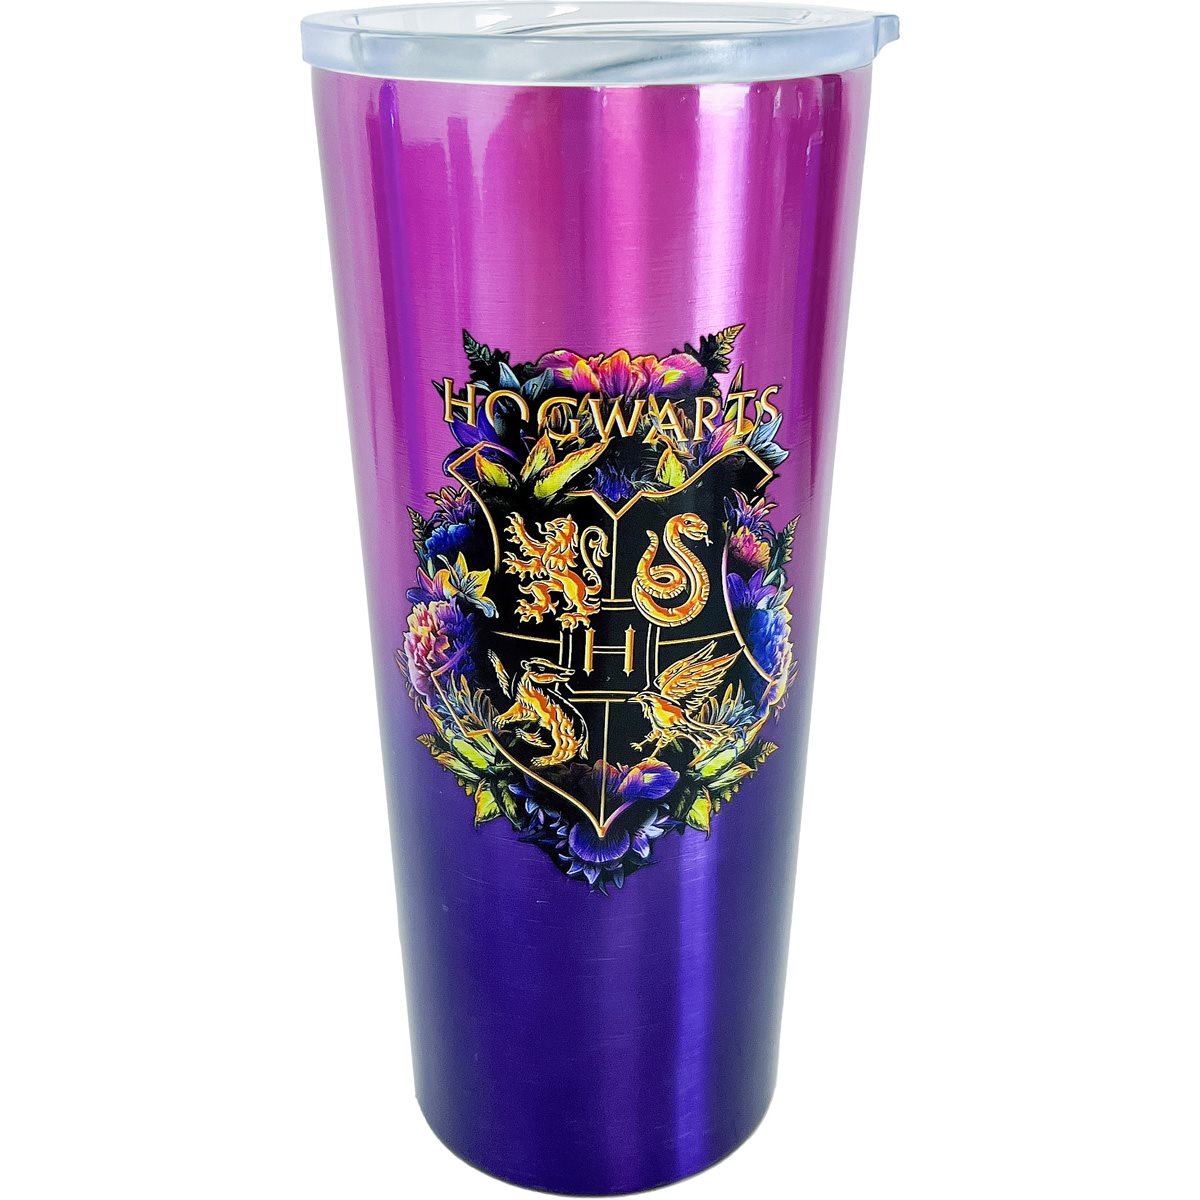 Spoontiques - Harry Potter Tumbler - Glasses Glitter Cup with Straw - 20 oz  - Acrylic - Gold